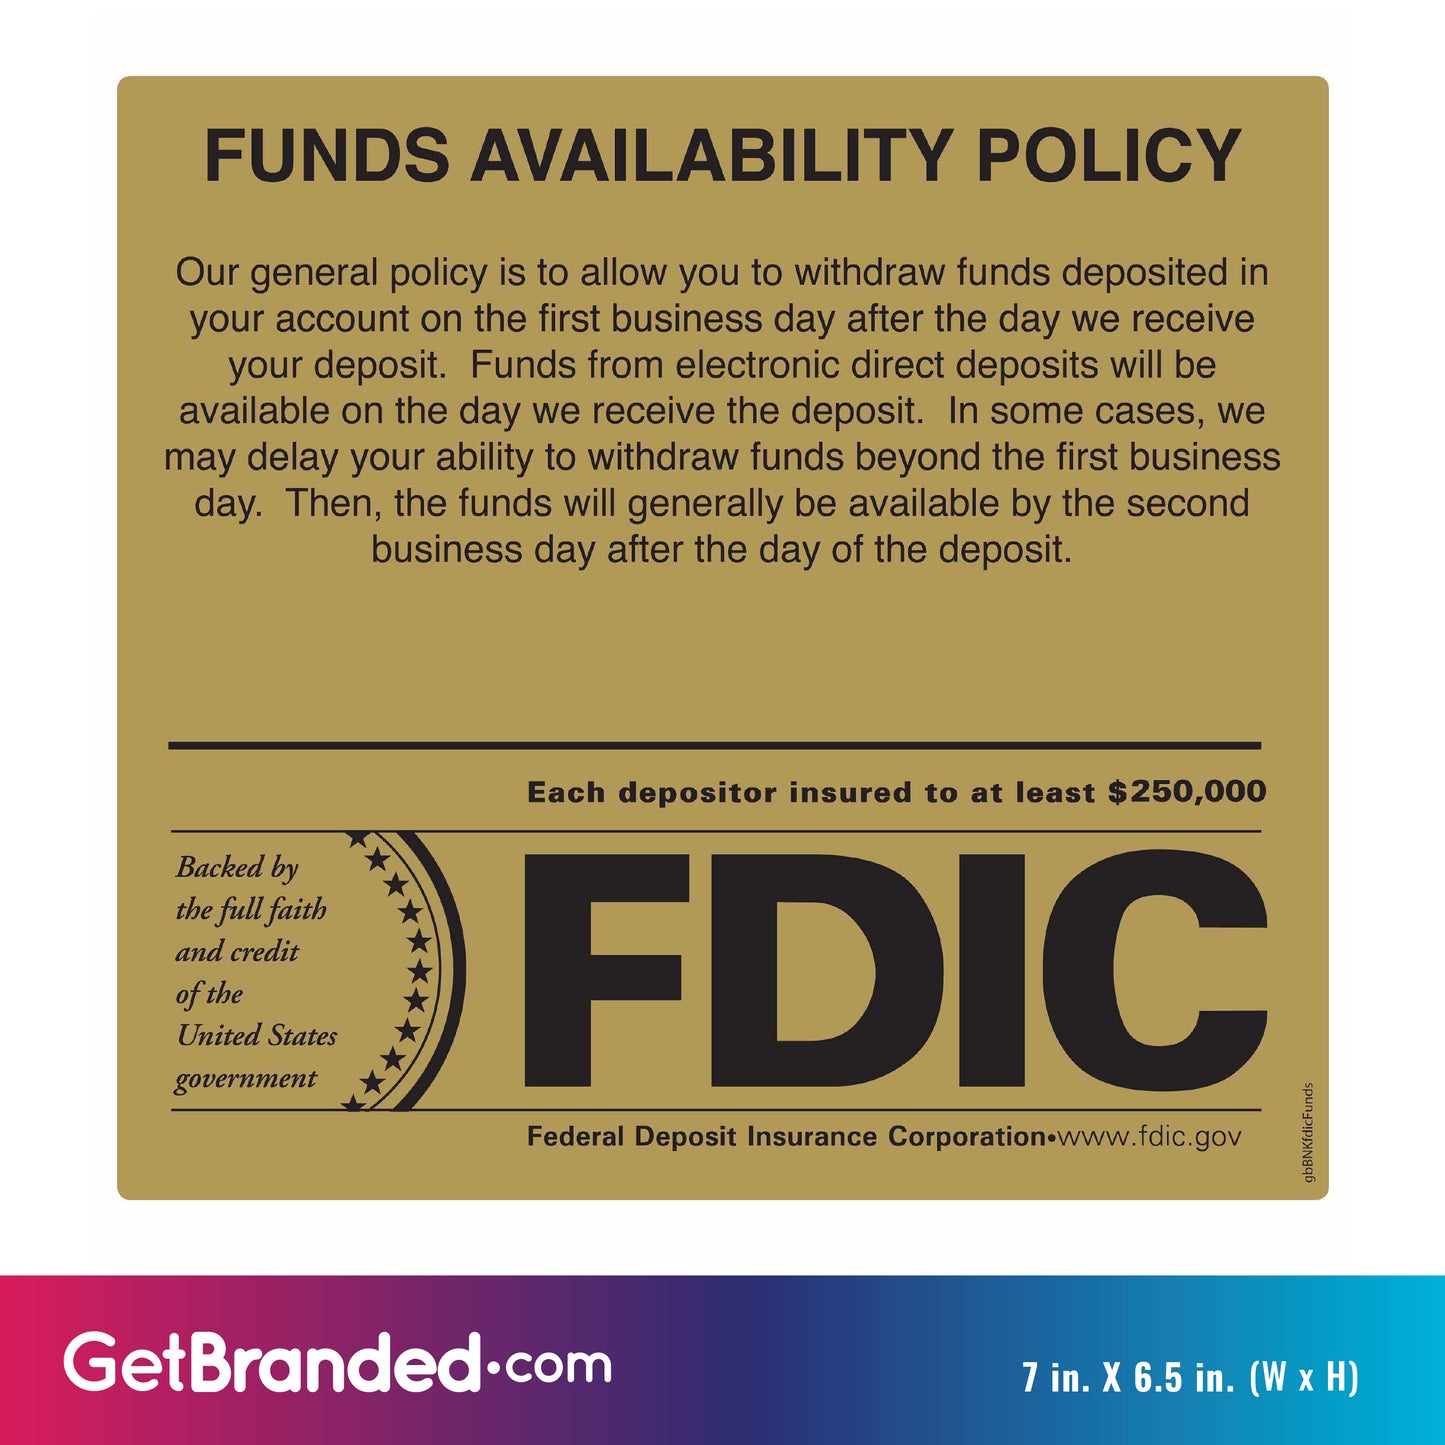 FDIC Gold and Black Funds Availability Policy Decal size guide.